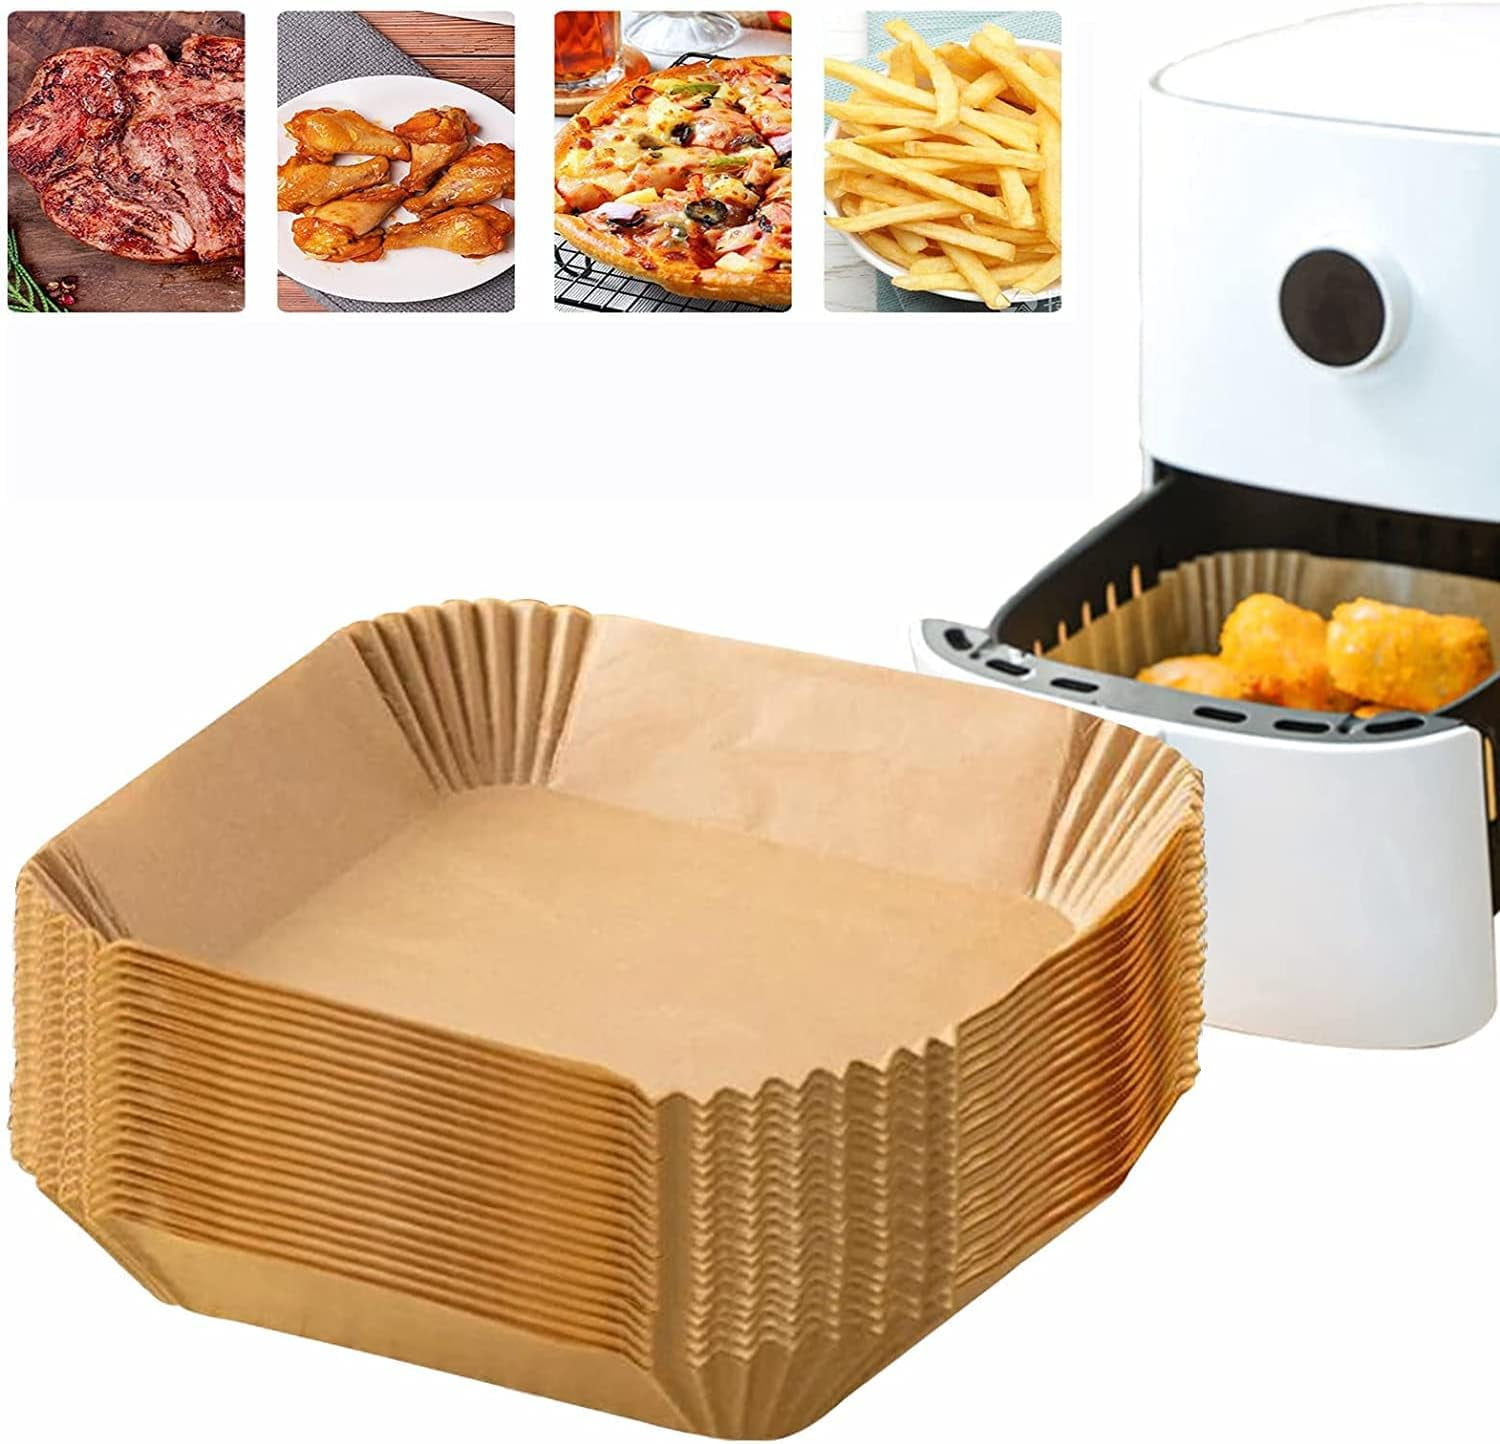 50pcs Square Air Fryer Liners Disposable, Greaseproof Paper For Air Fryer,  Compatible With Cosori, Ninja, Tower Cosori (unbleached)